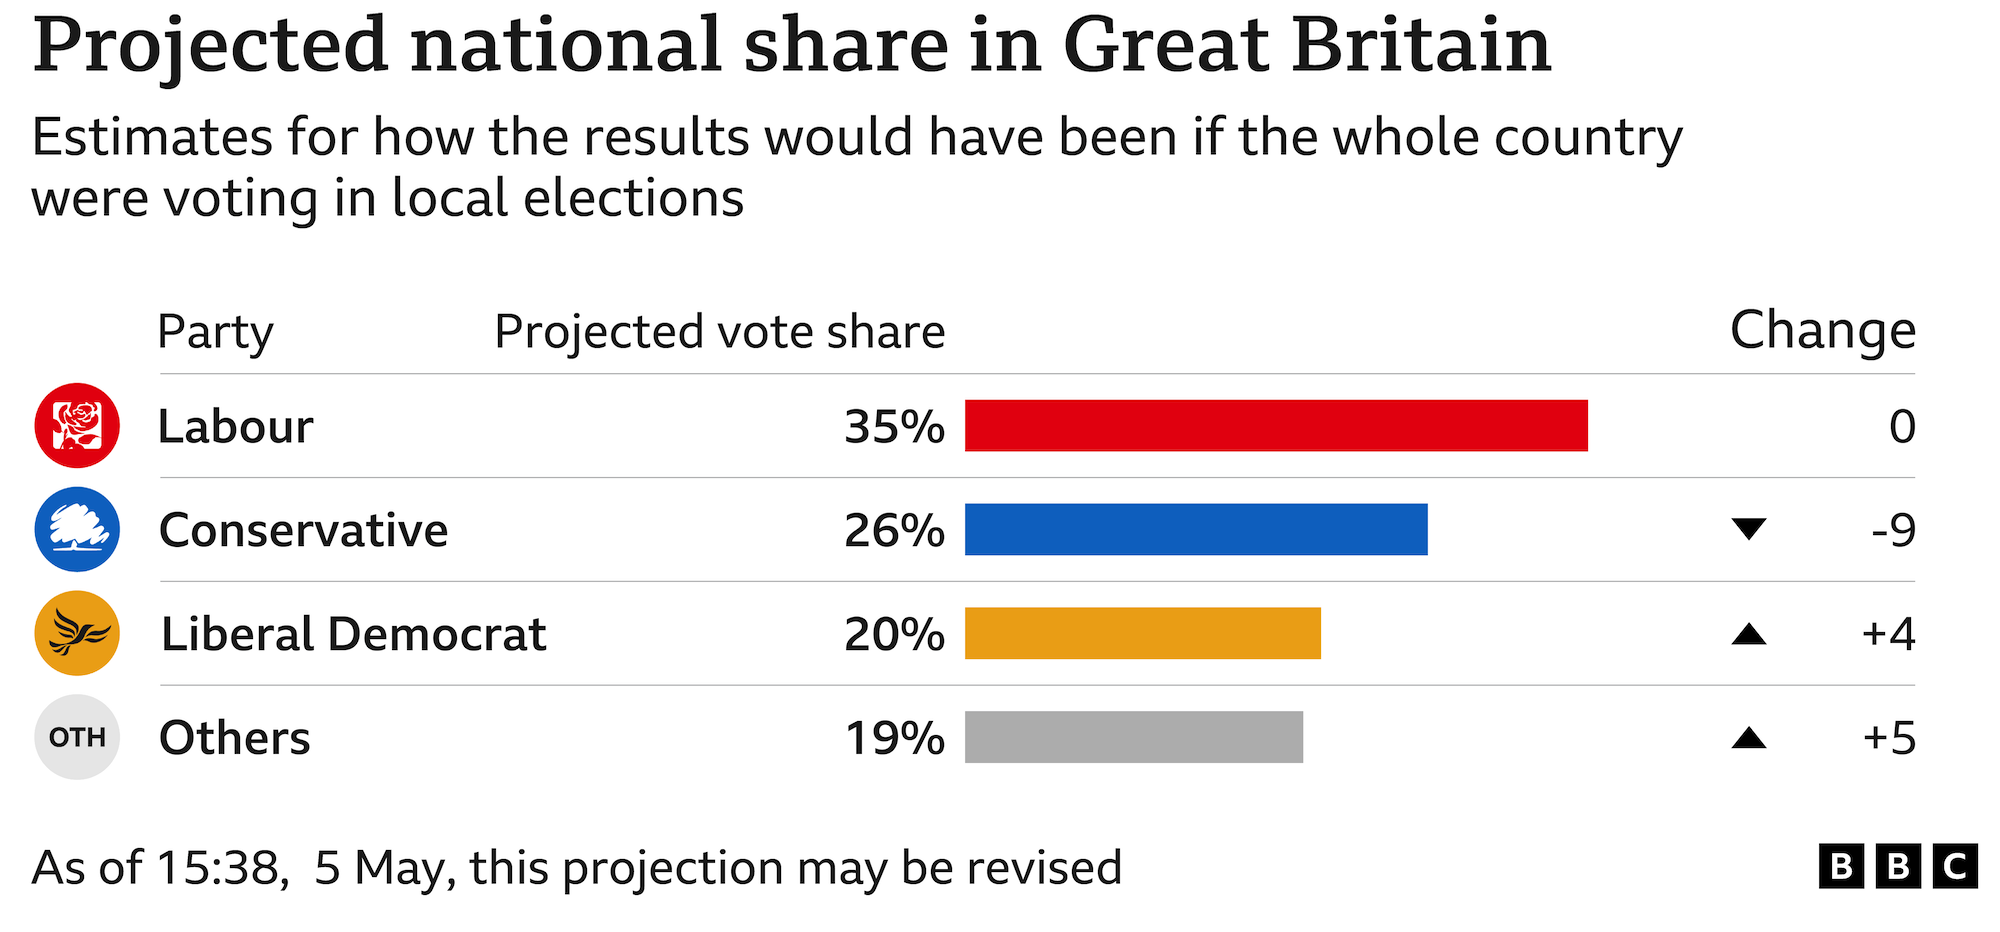 Chart showing projected national share. These are estimates for how the election results would have translated if the whole country were voting in local elections. Labour projected share 35% Change 0, Conservative projected share 26% Change -9, Liberal Democrat projected share 20% Change +4, Others projected share 19% Change +5